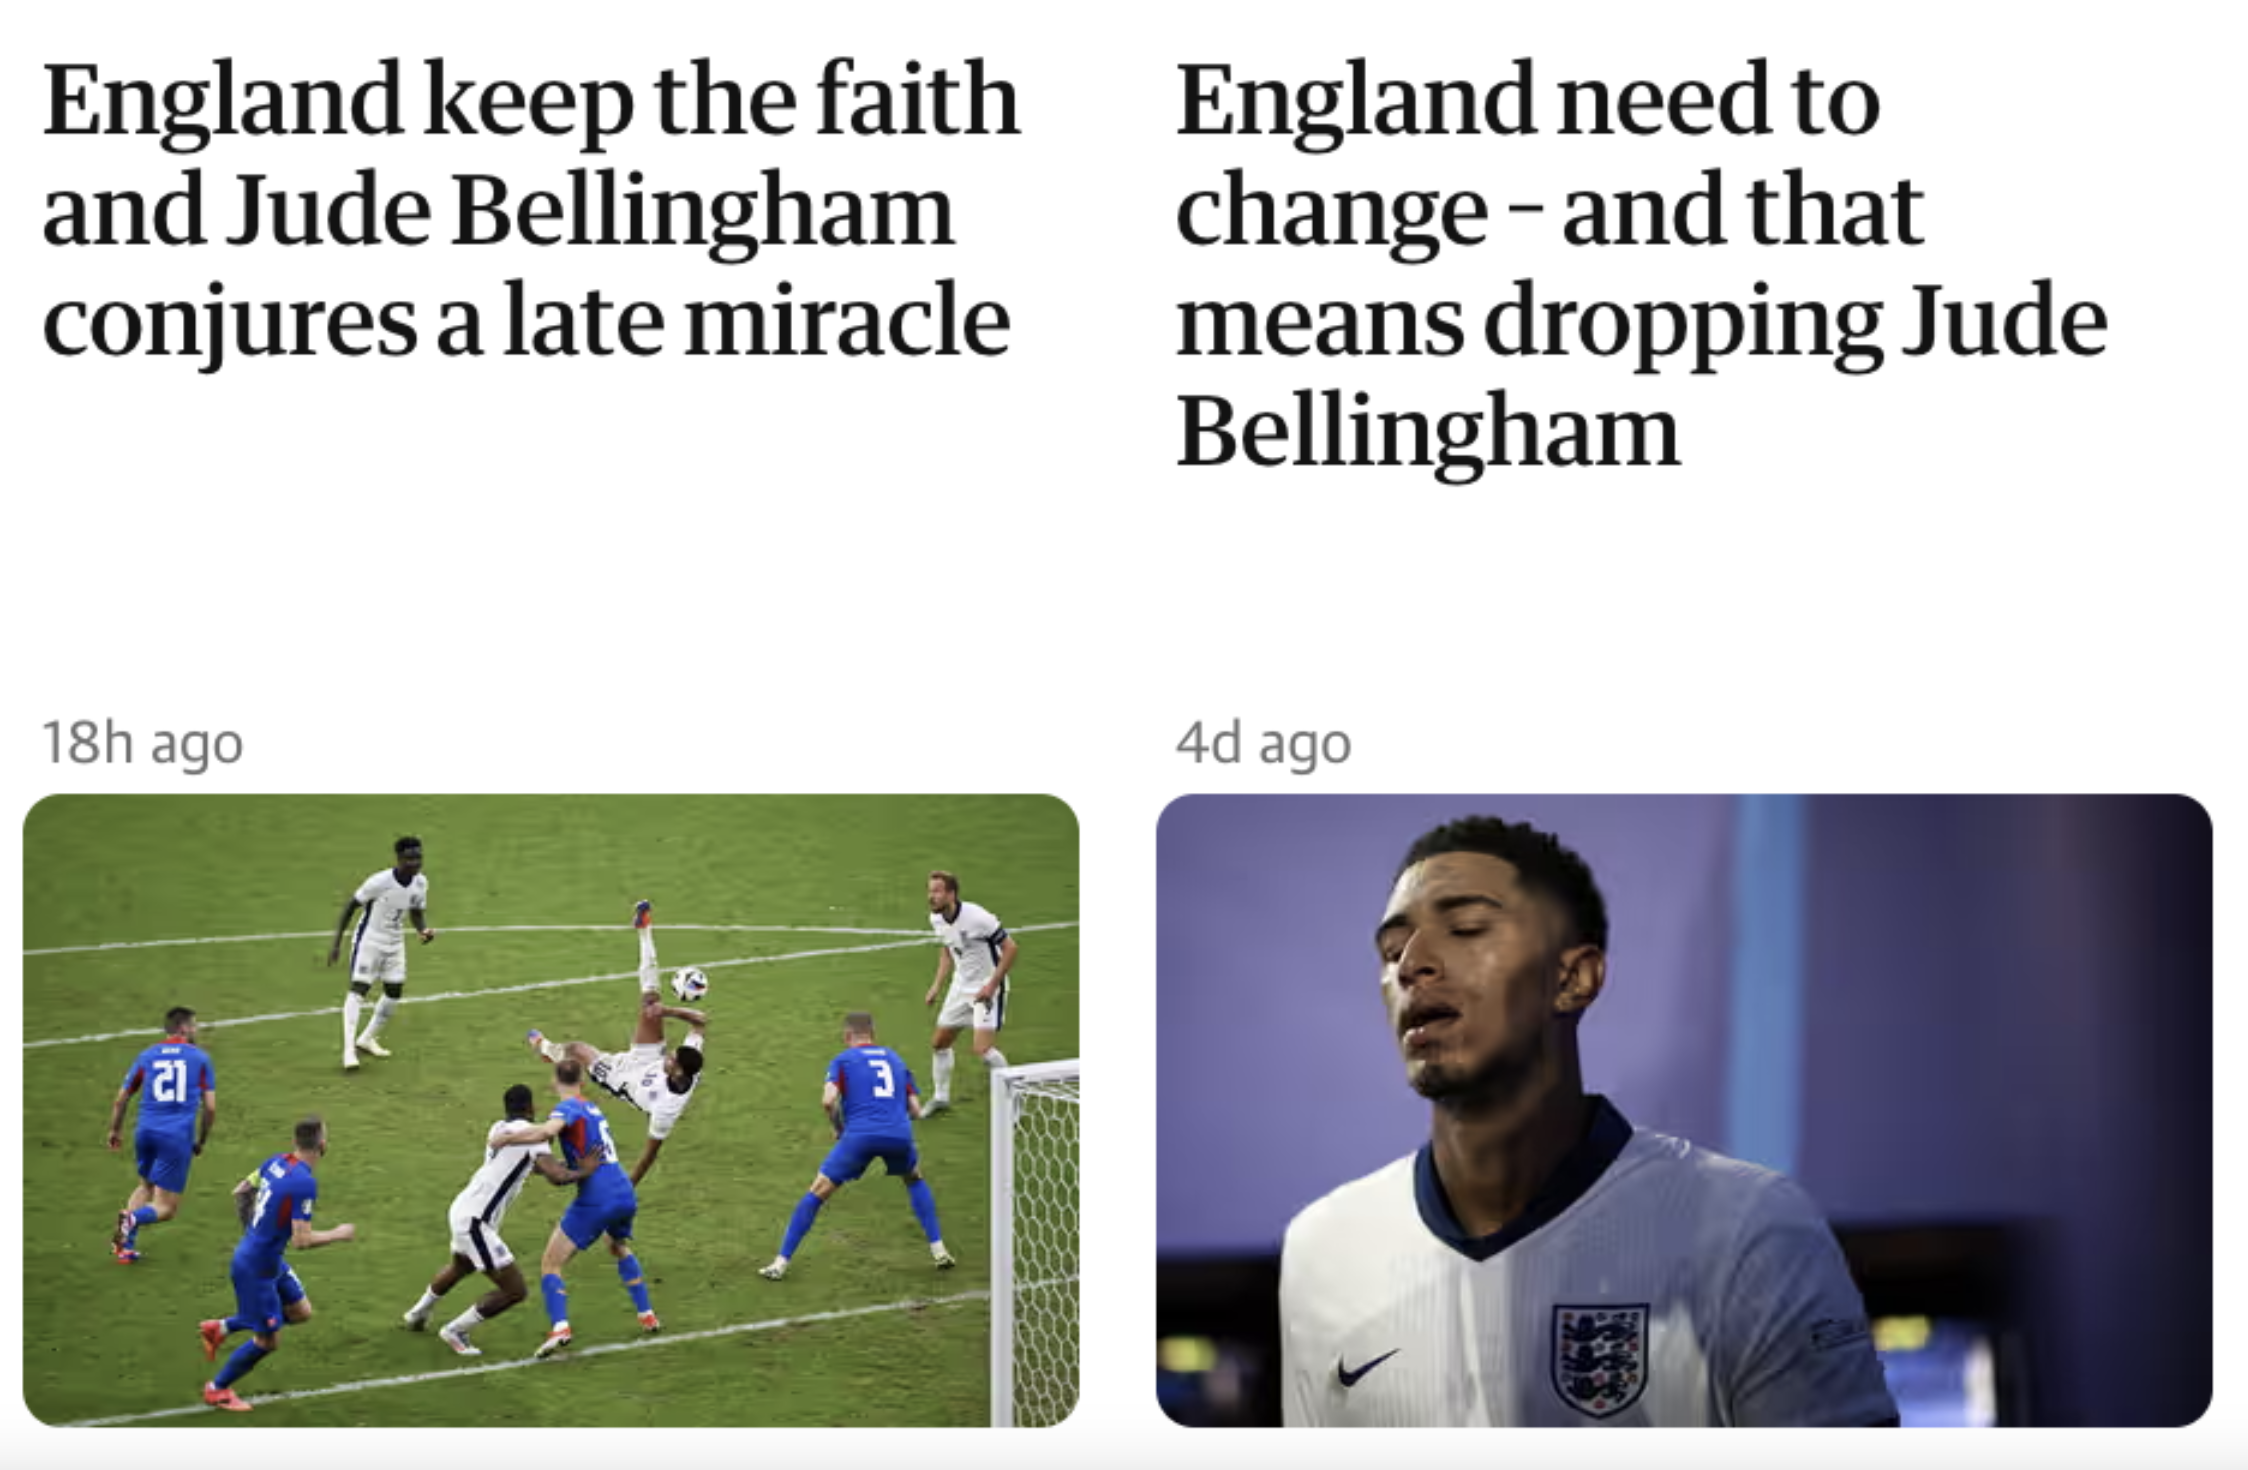 player - England keep the faith and Jude Bellingham conjures a late miracle England need to change and that means dropping Jude Bellingham 18h ago 4d ago